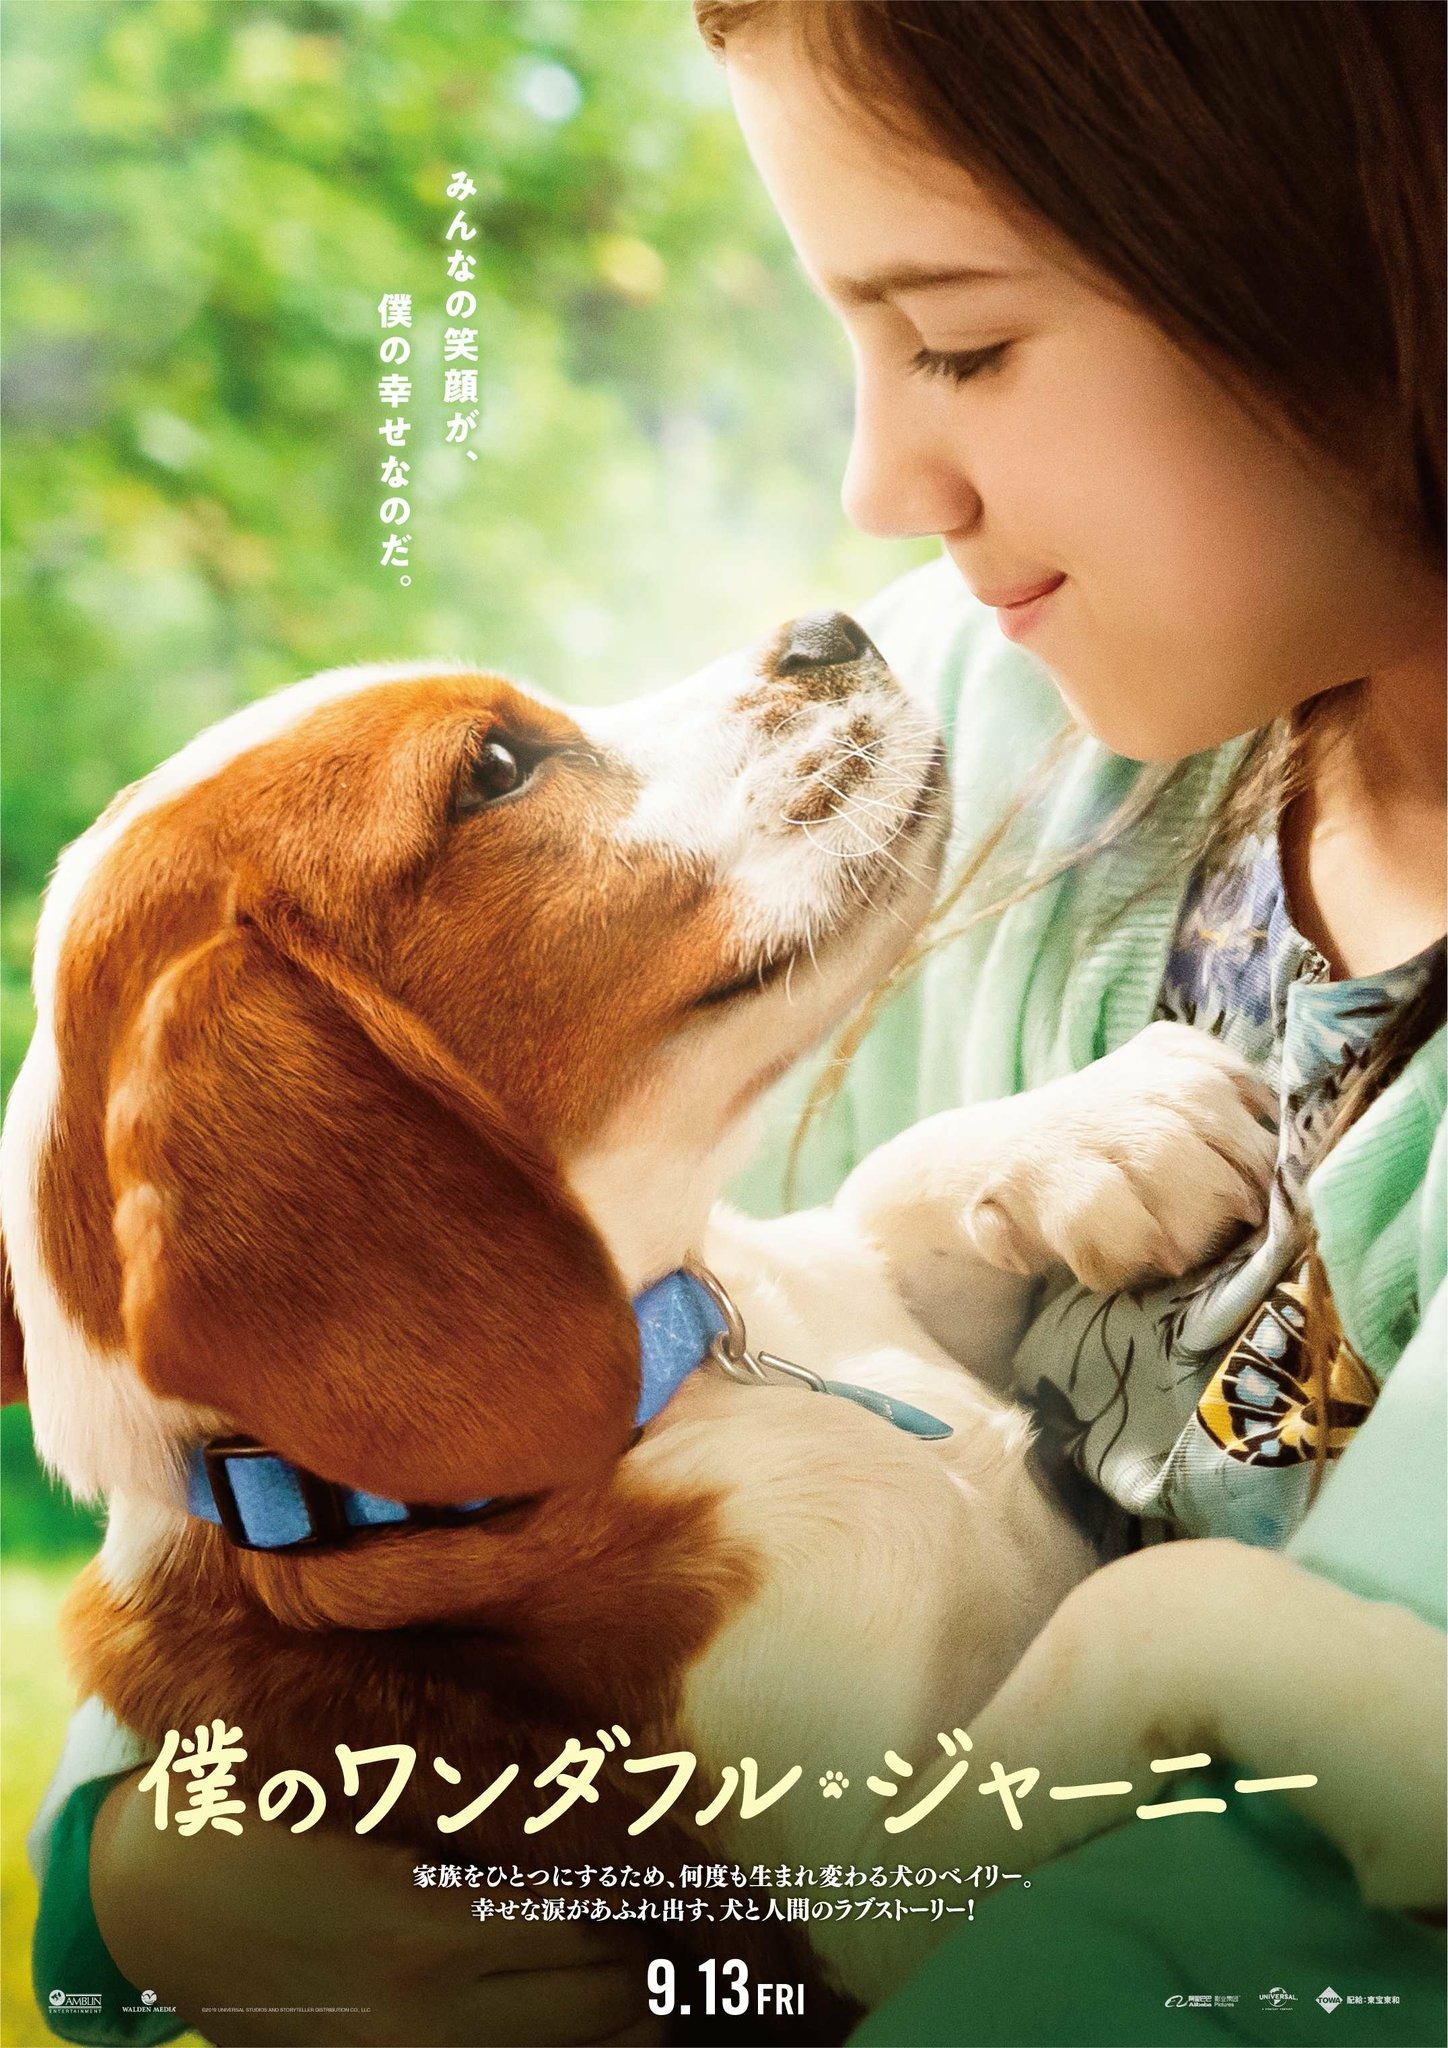 Mega Sized Movie Poster Image for A Dog's Journey (#11 of 11)